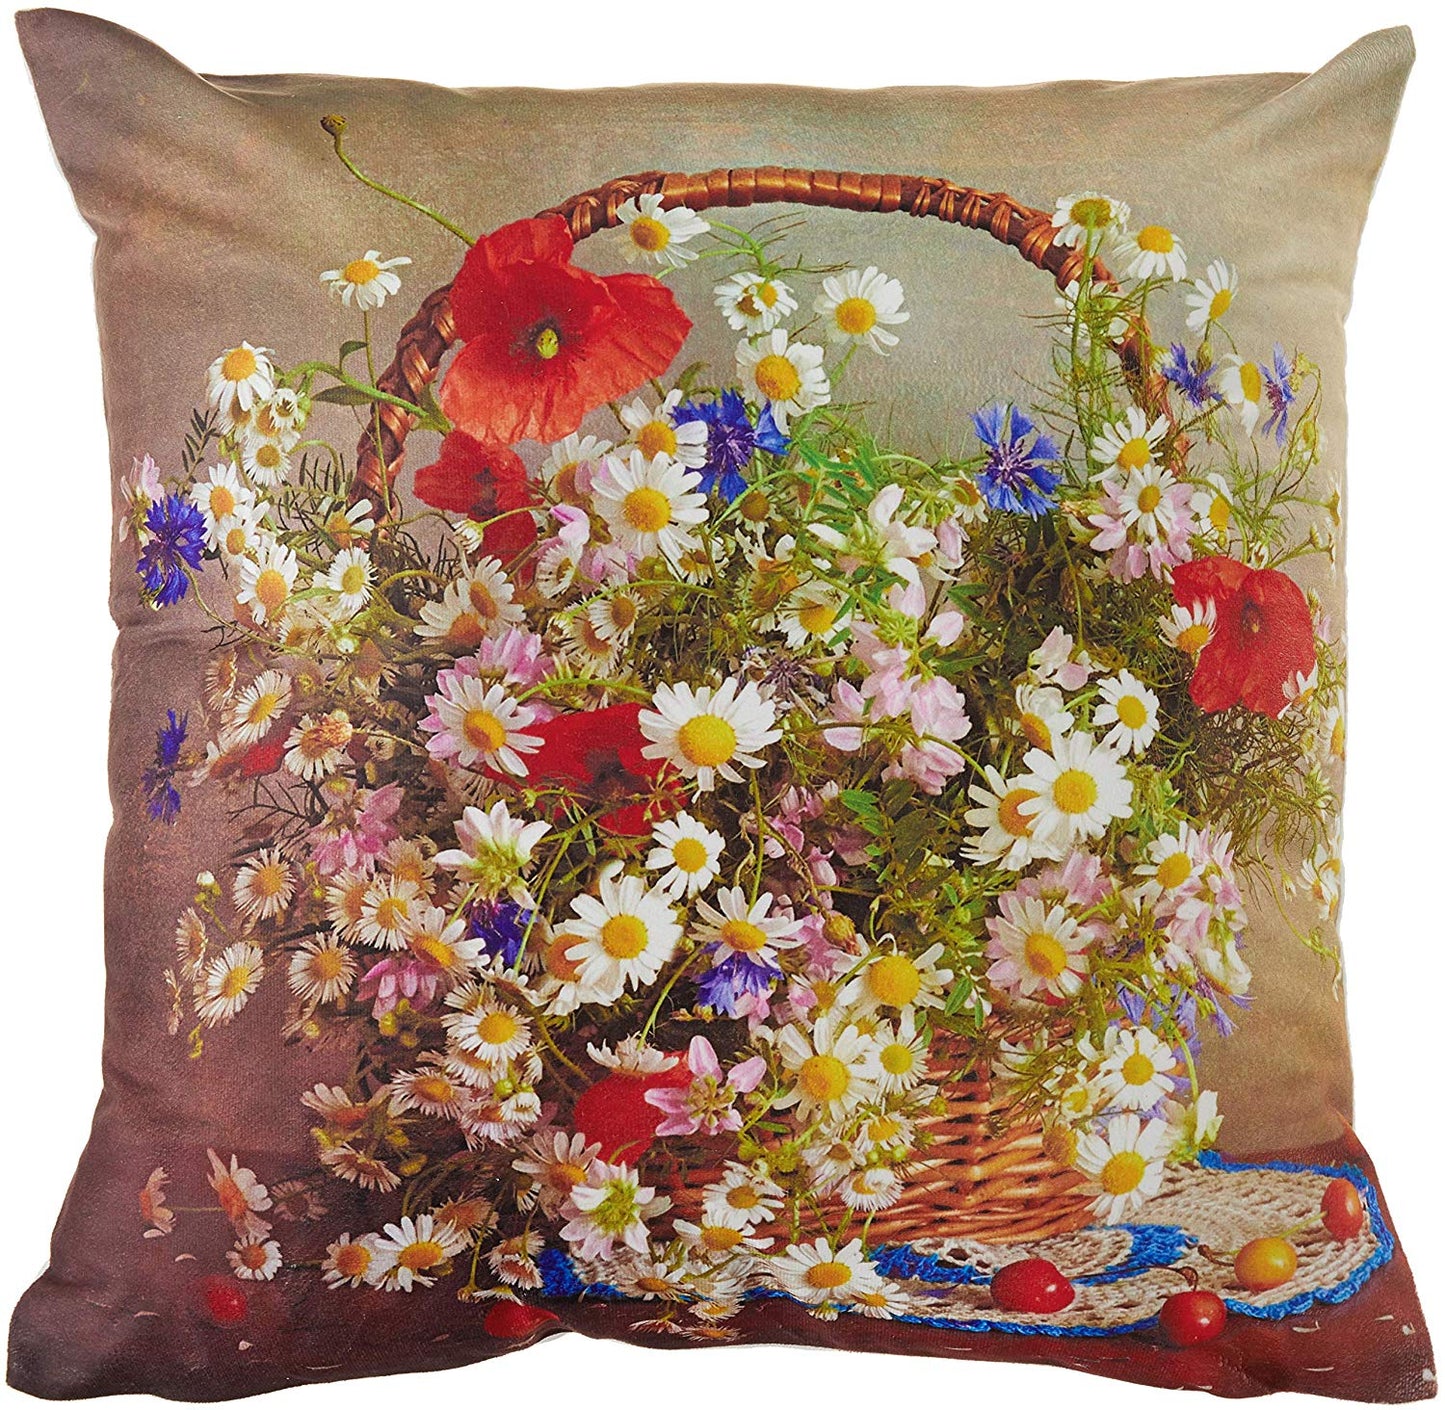 Heritage Floral Decorative Throw Pillow Cover